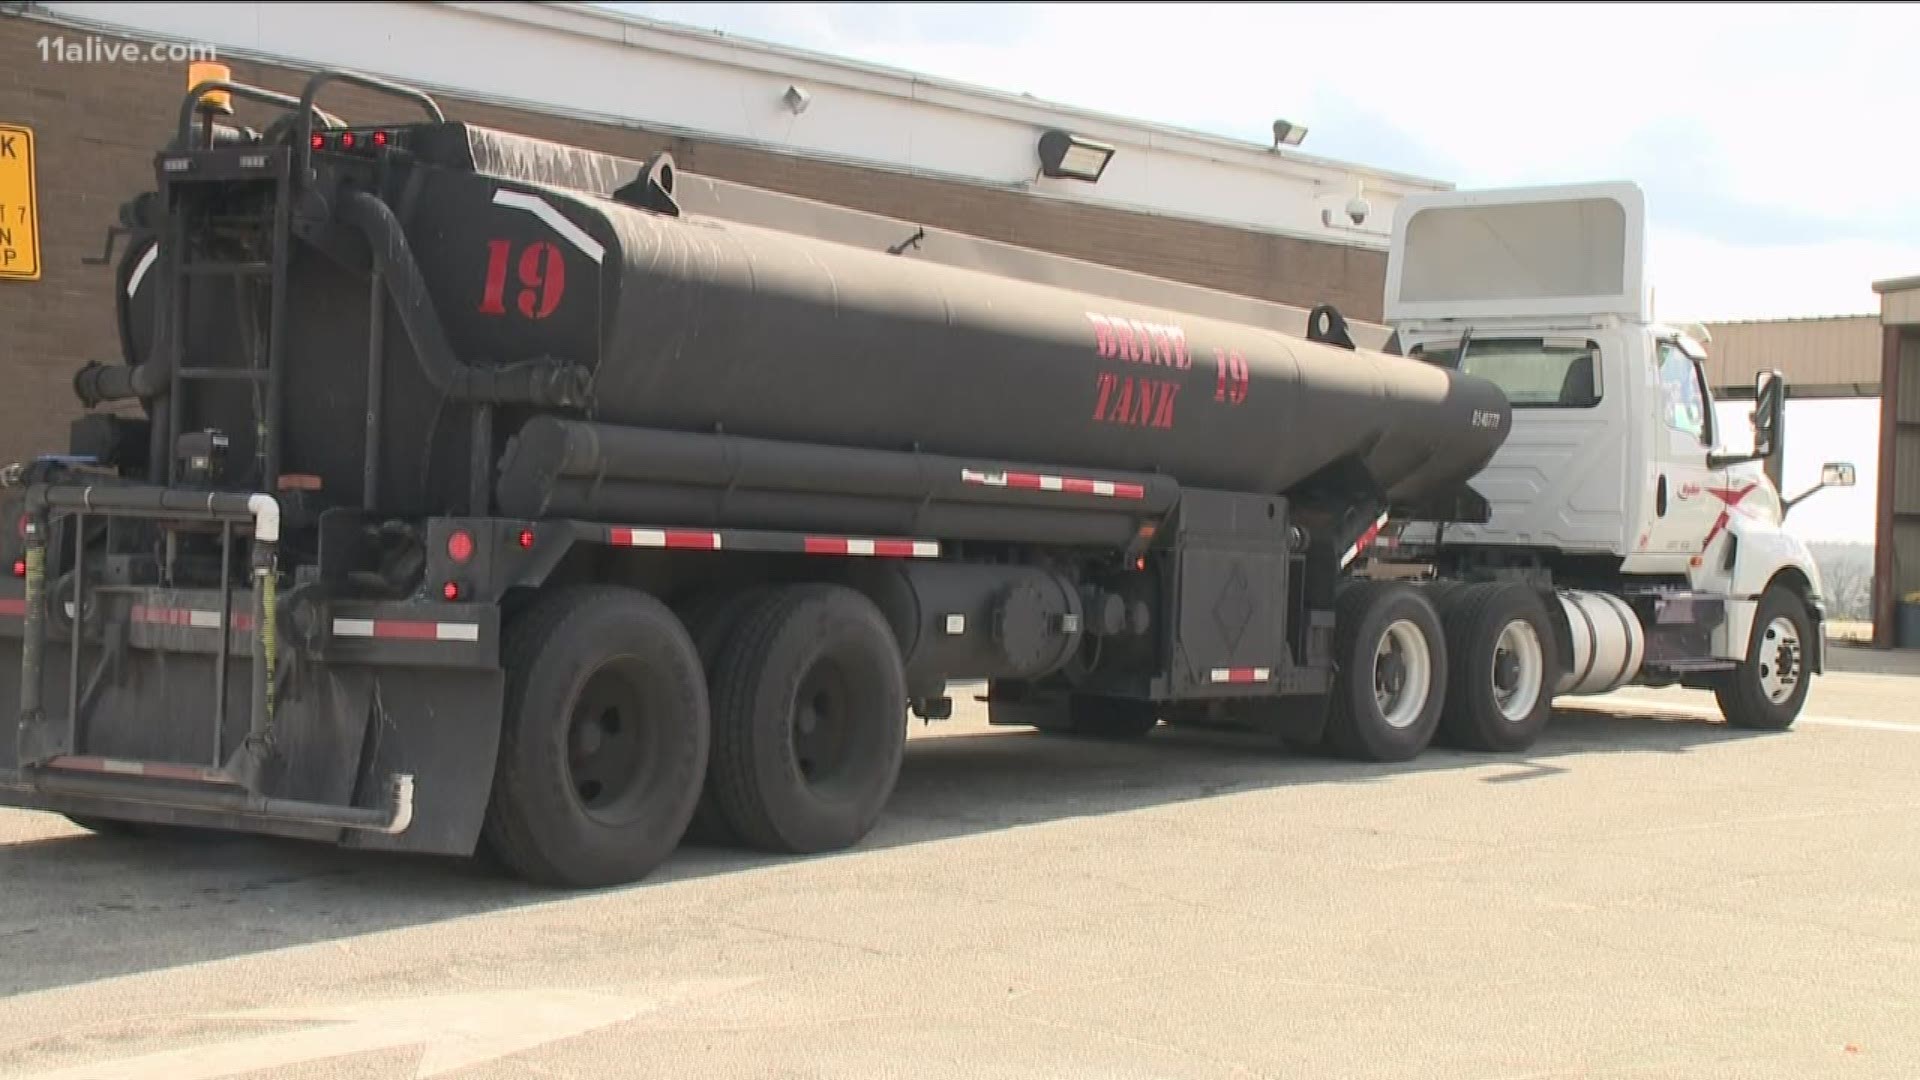 The state has 900,000 gallons of brine and they're going to start spreading it – from this and other state facilities -- shortly after sunset.